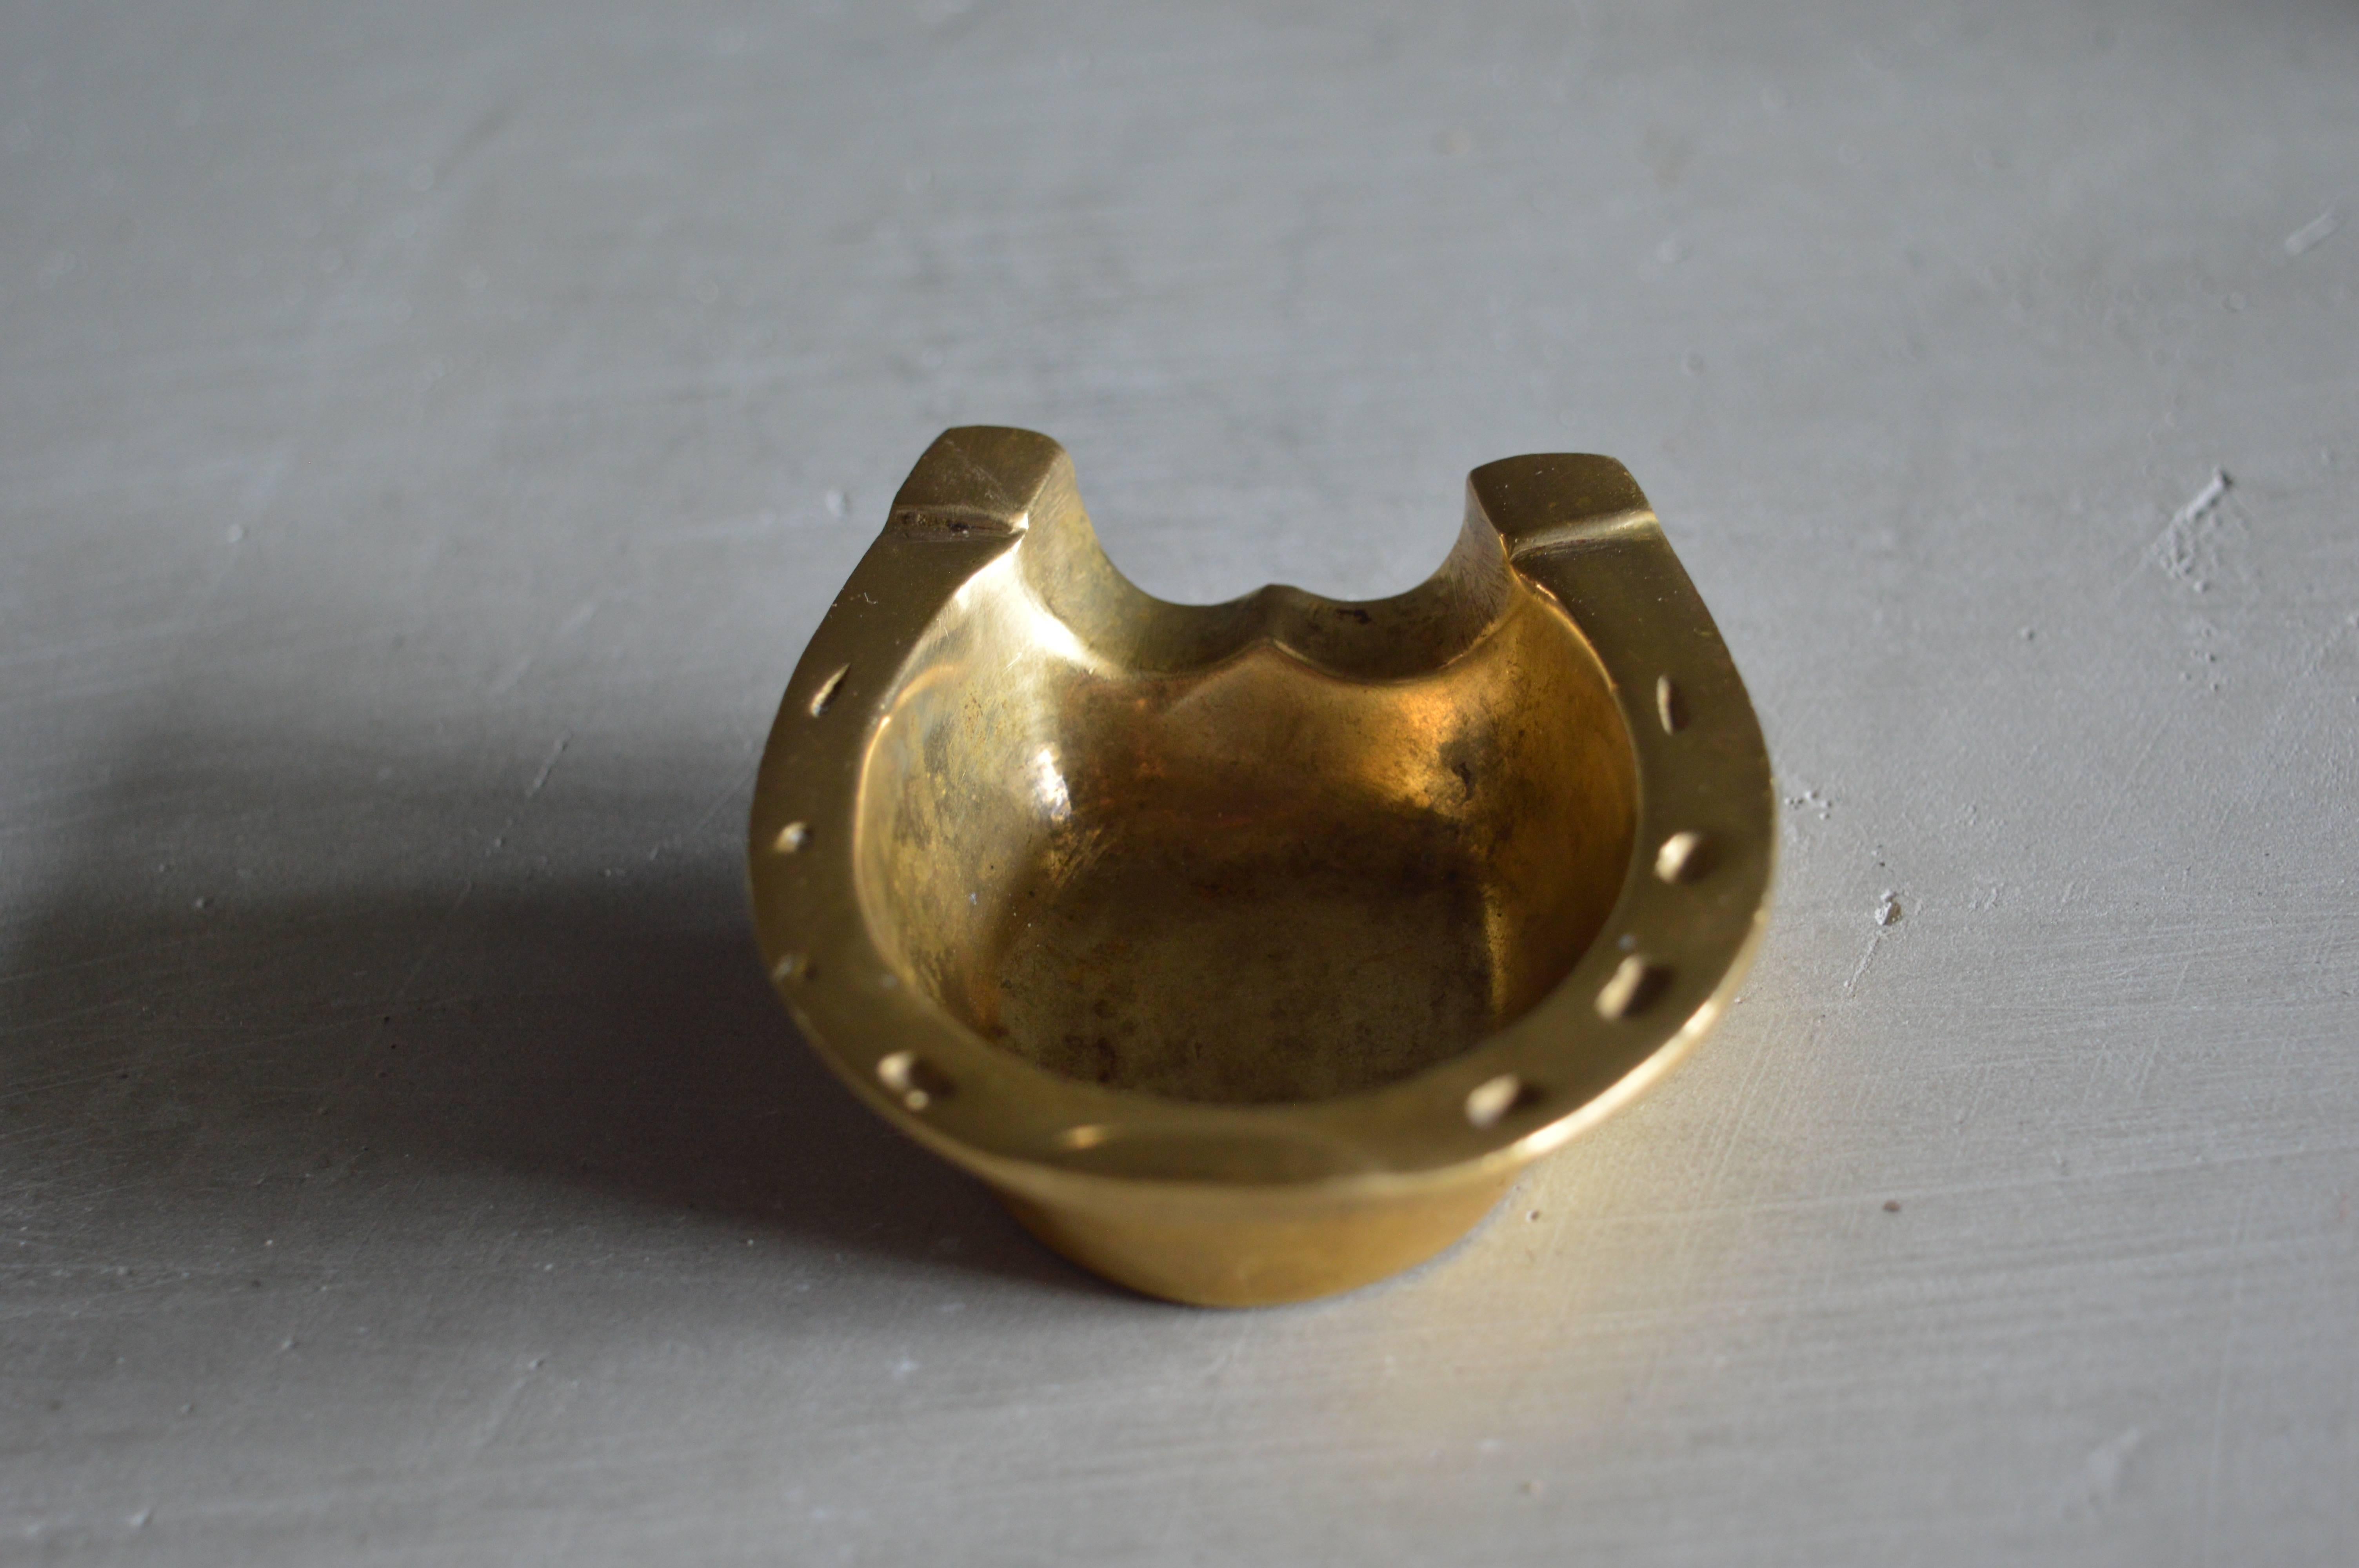 Petite French brass ashtray in the shape of a horseshoe. Very solid and heavy piece. Excellent patina to brass.